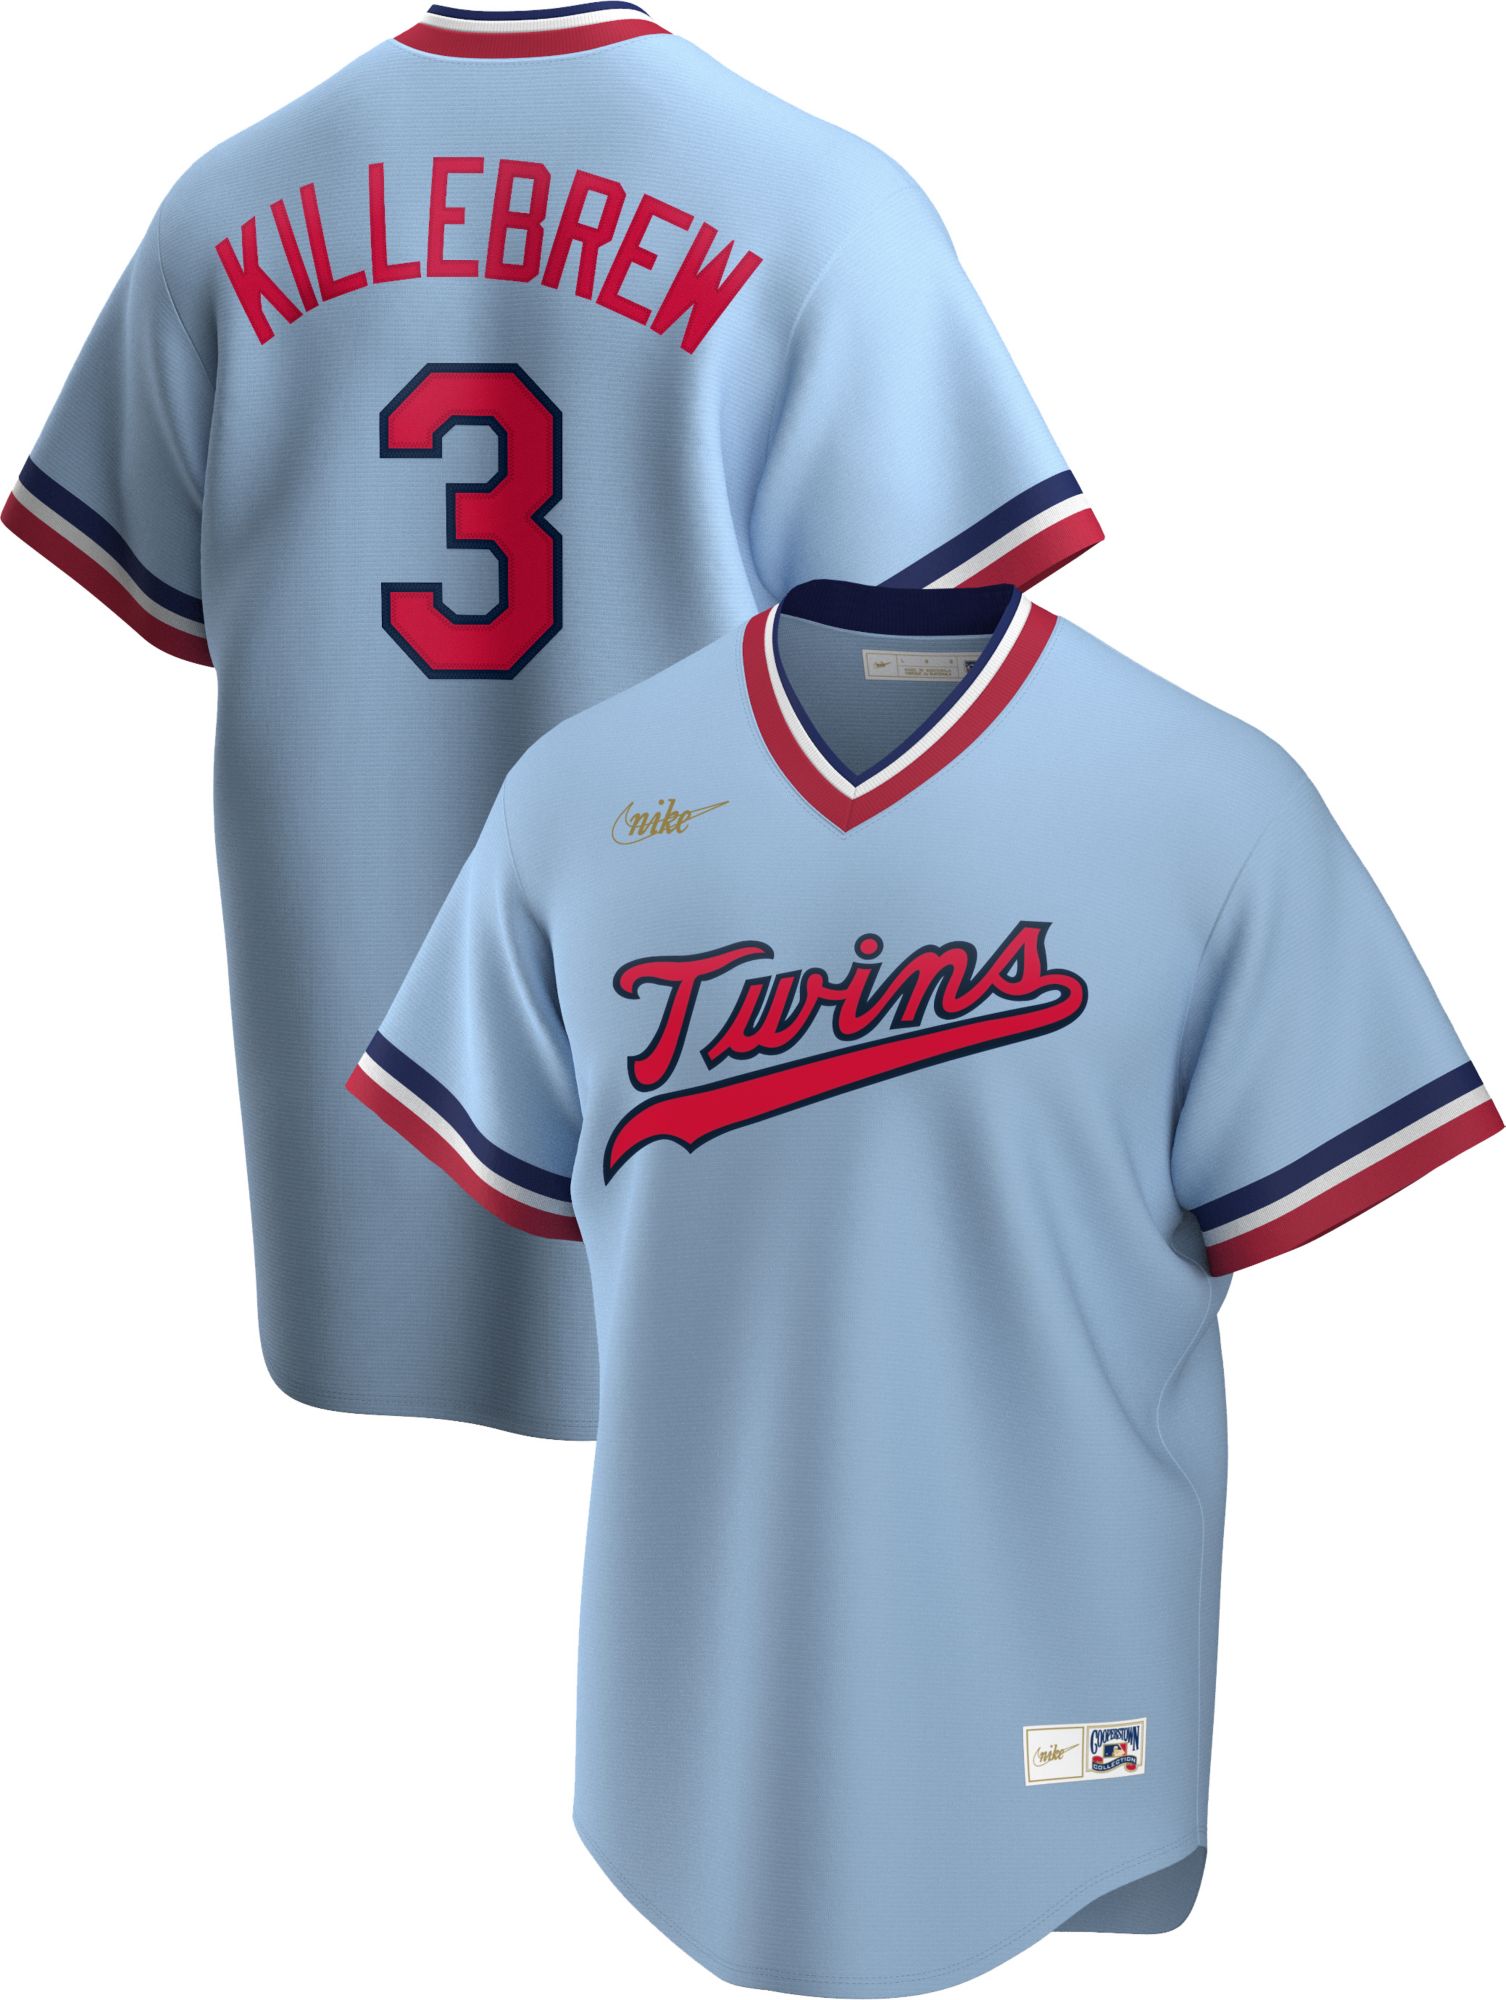 Men's Nike Light Blue Minnesota Twins Road Cooperstown Collection